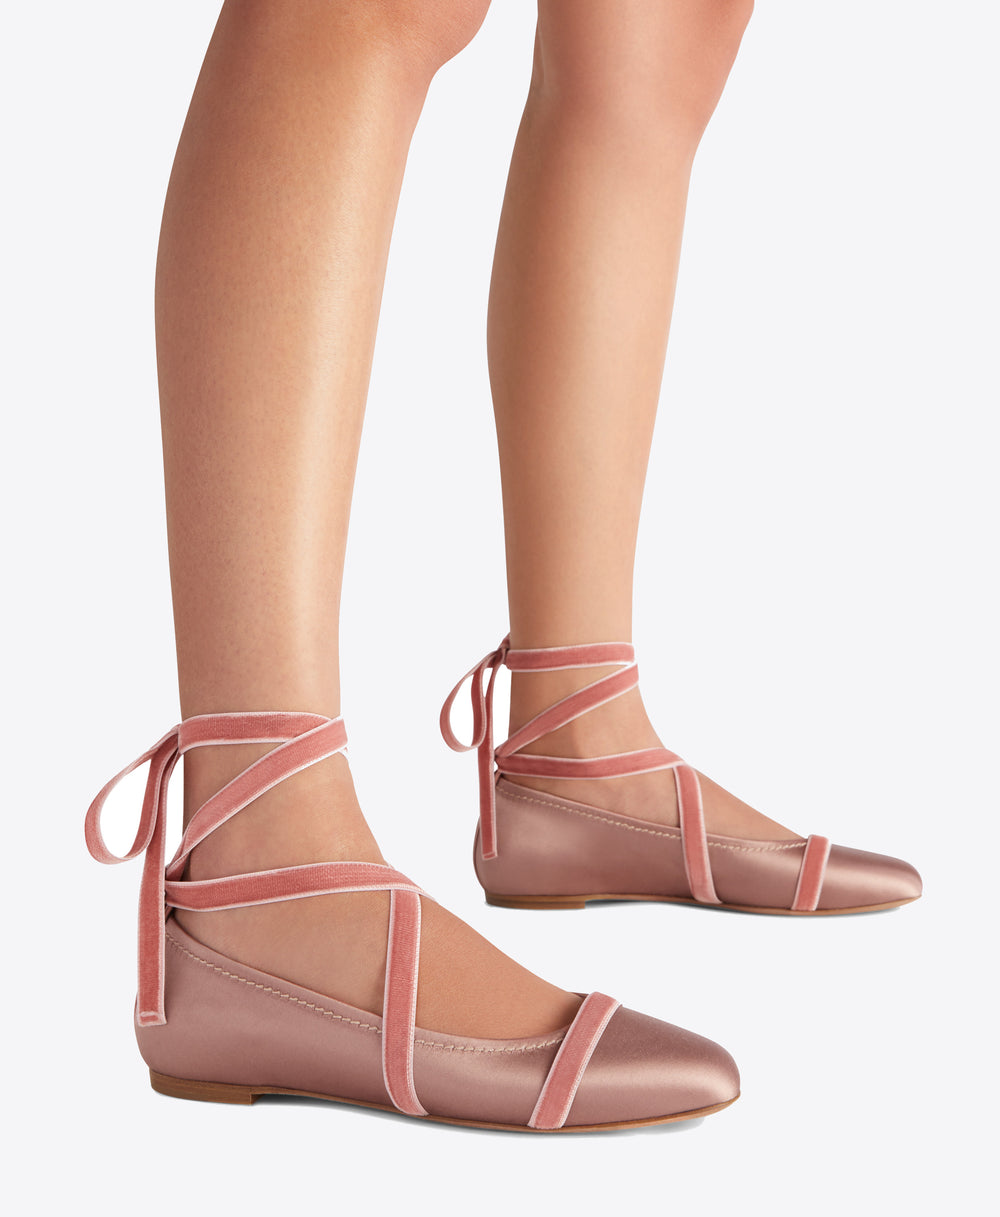 Spencer Flats in Mauve Satin with Velvet Ribbons Malone Souliers